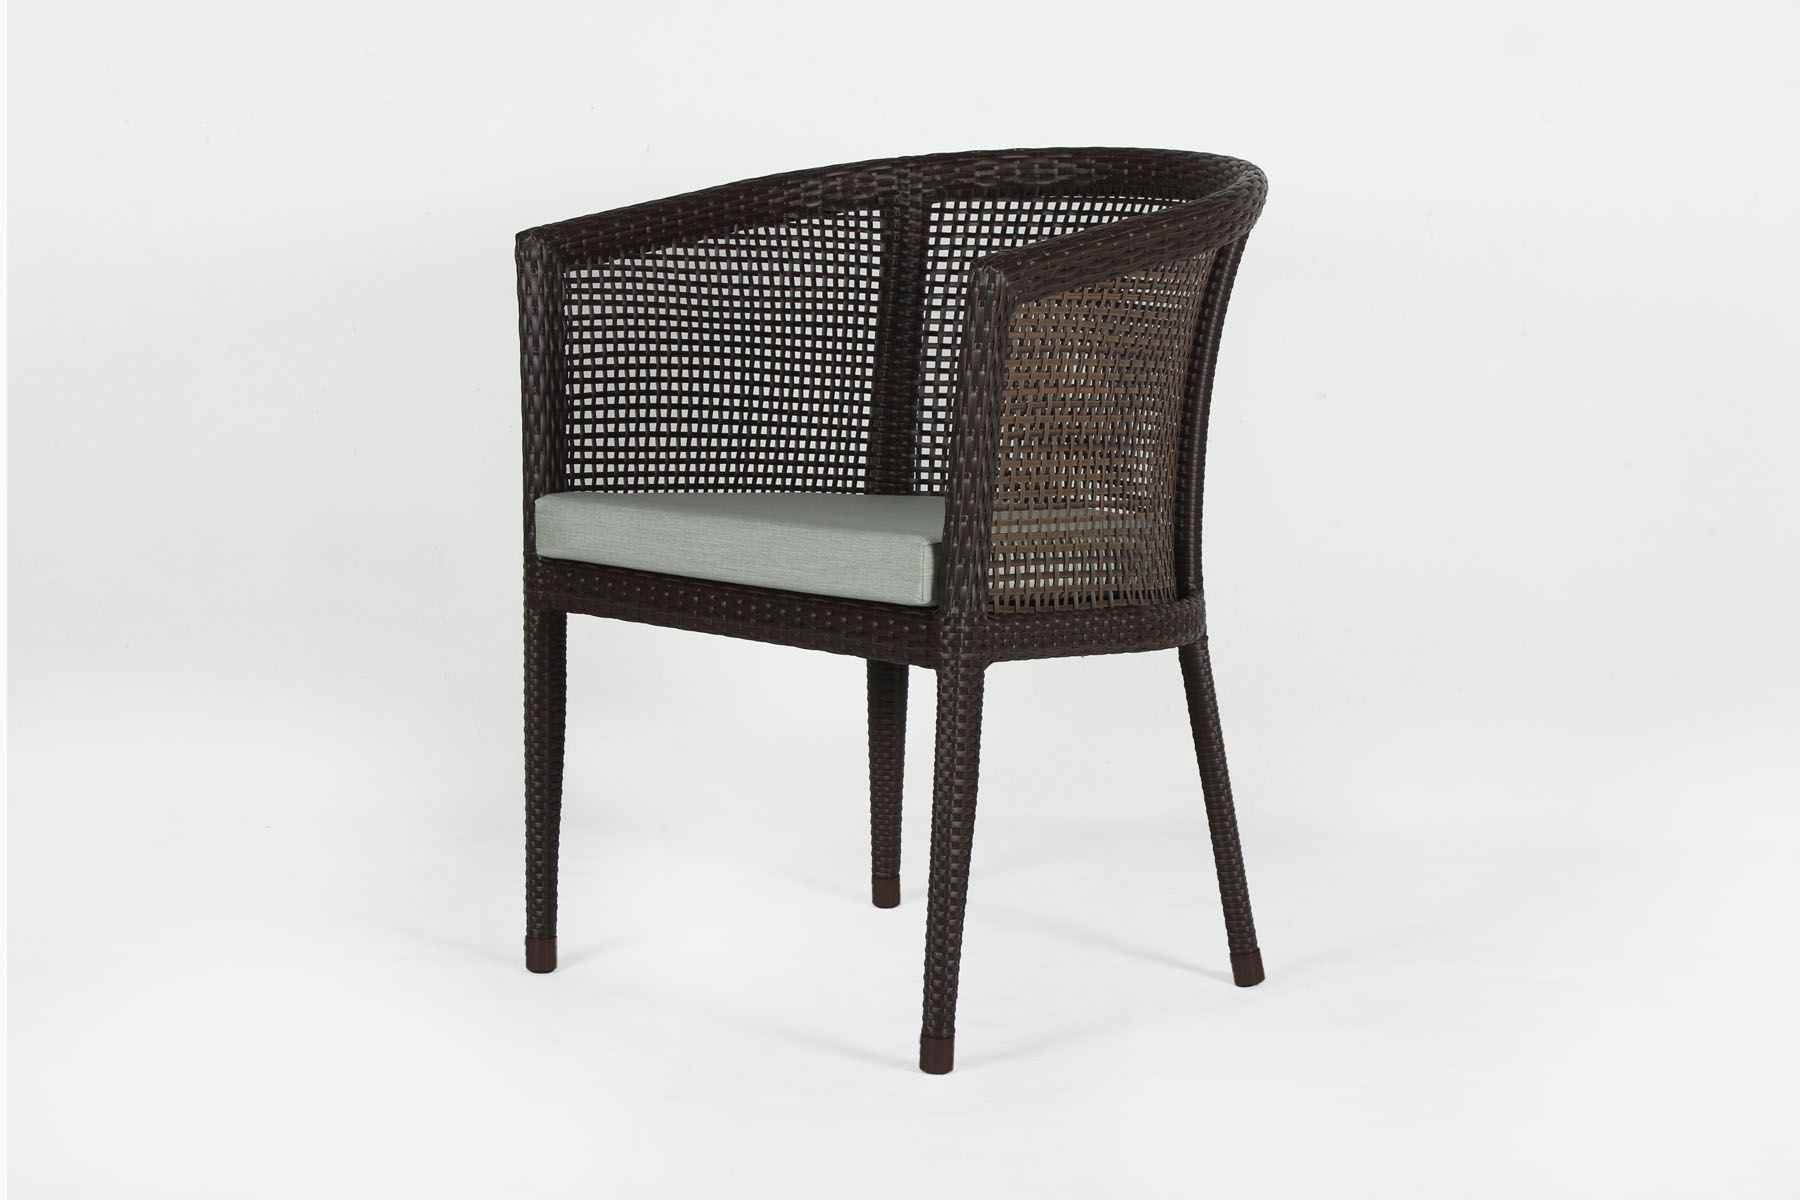 Ella Outdoor Chair And Table Set